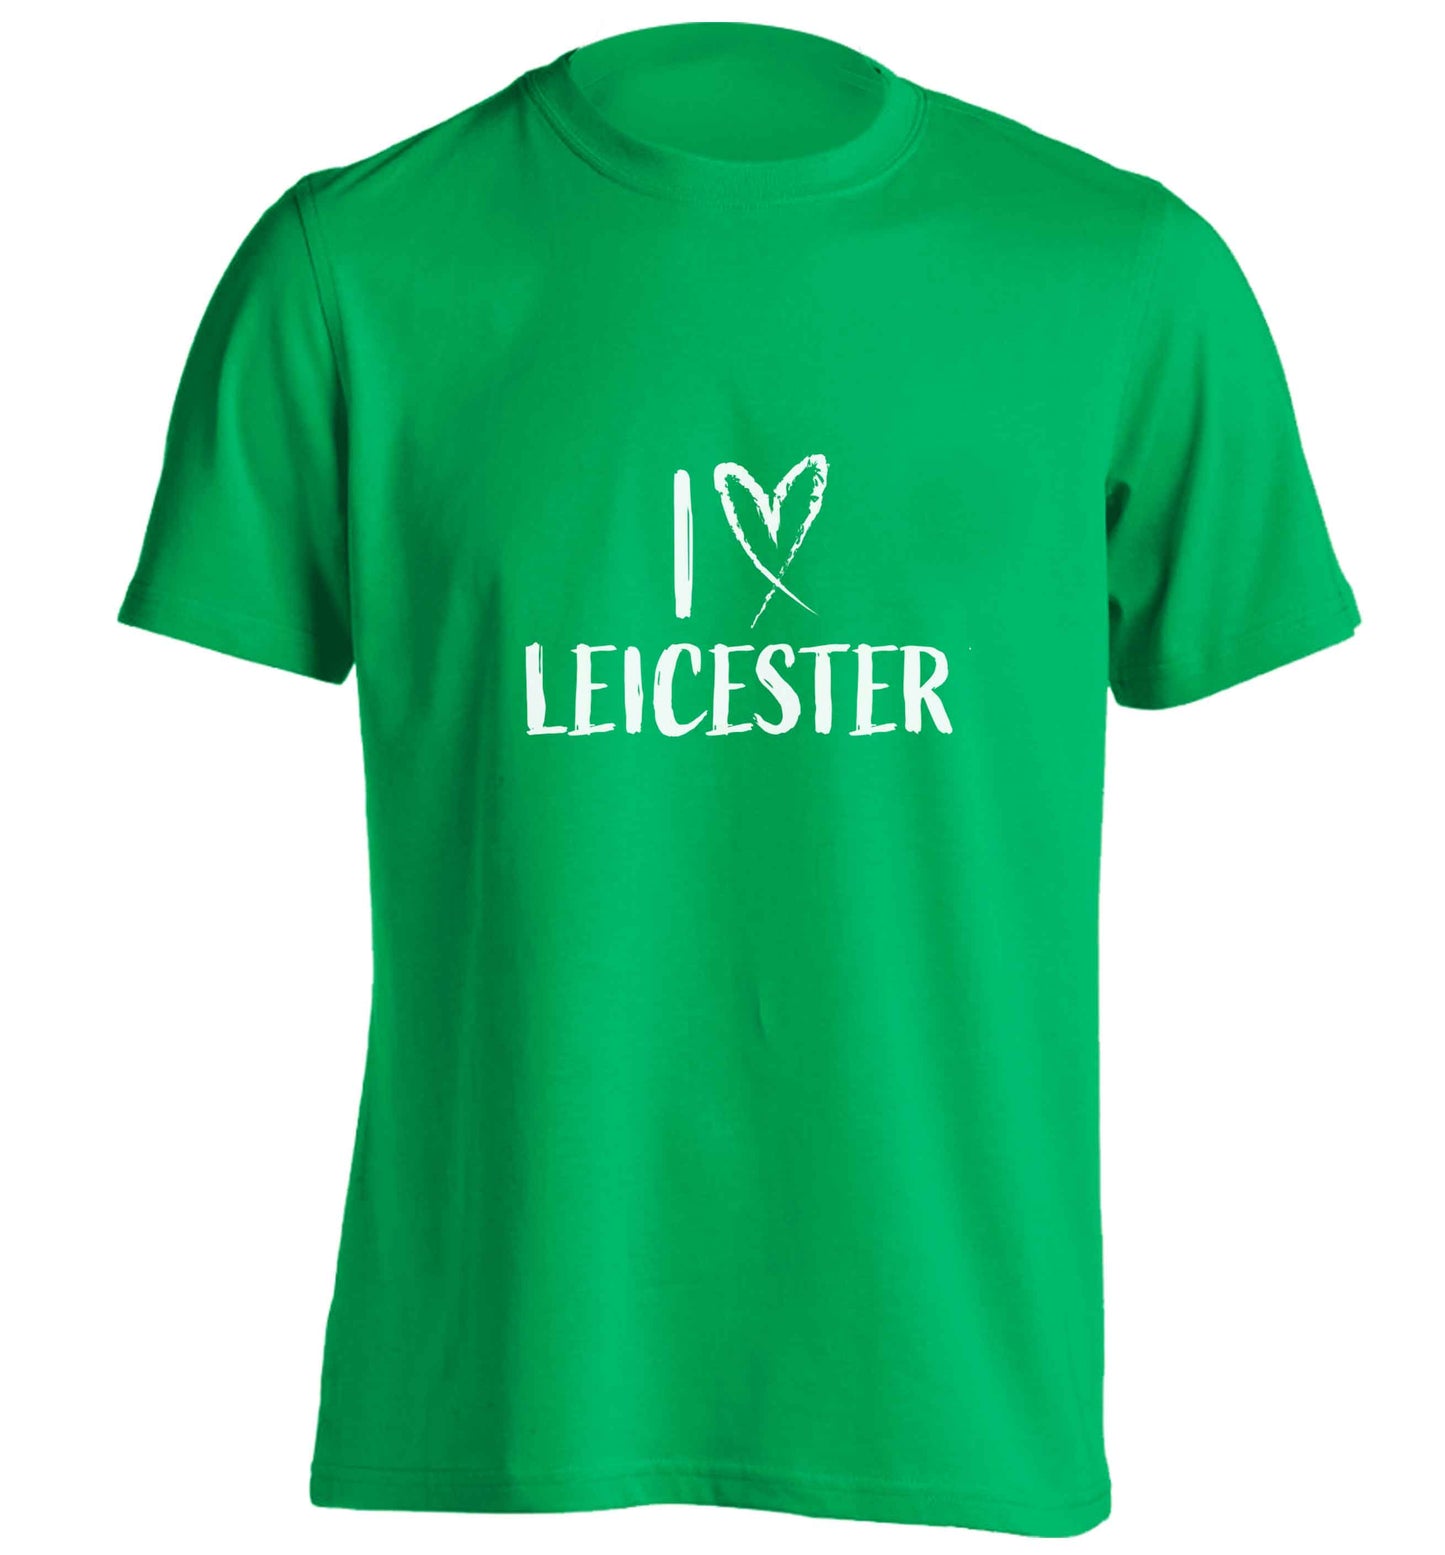 I love Leicester adults unisex green Tshirt 2XL